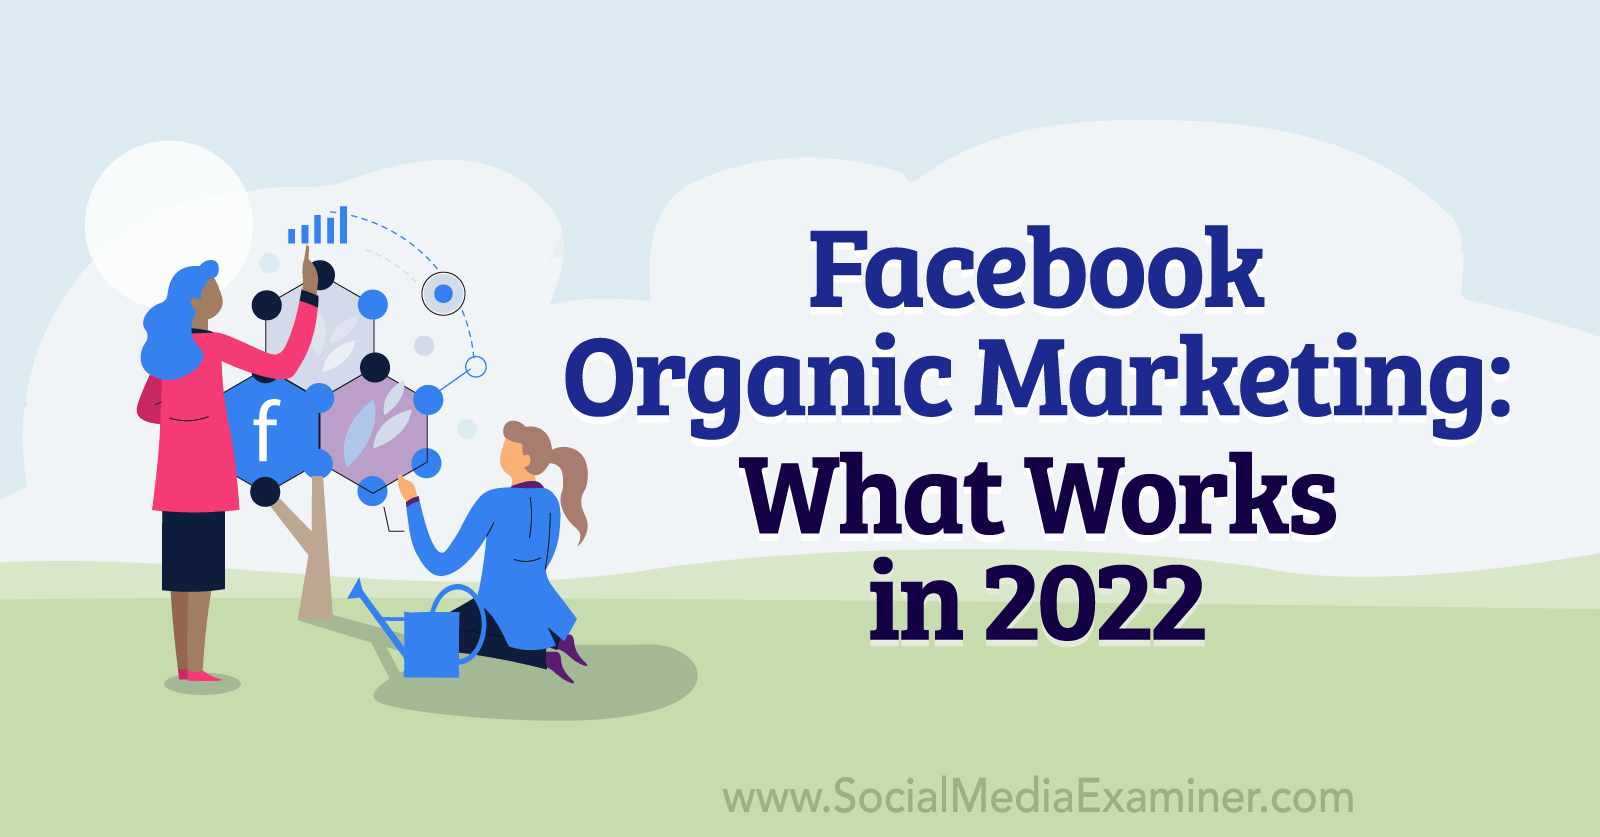 Facebook Organic Marketing: What Works in 2022 featuring insights from Mari Smith on the Social Media Marketing Podcast.